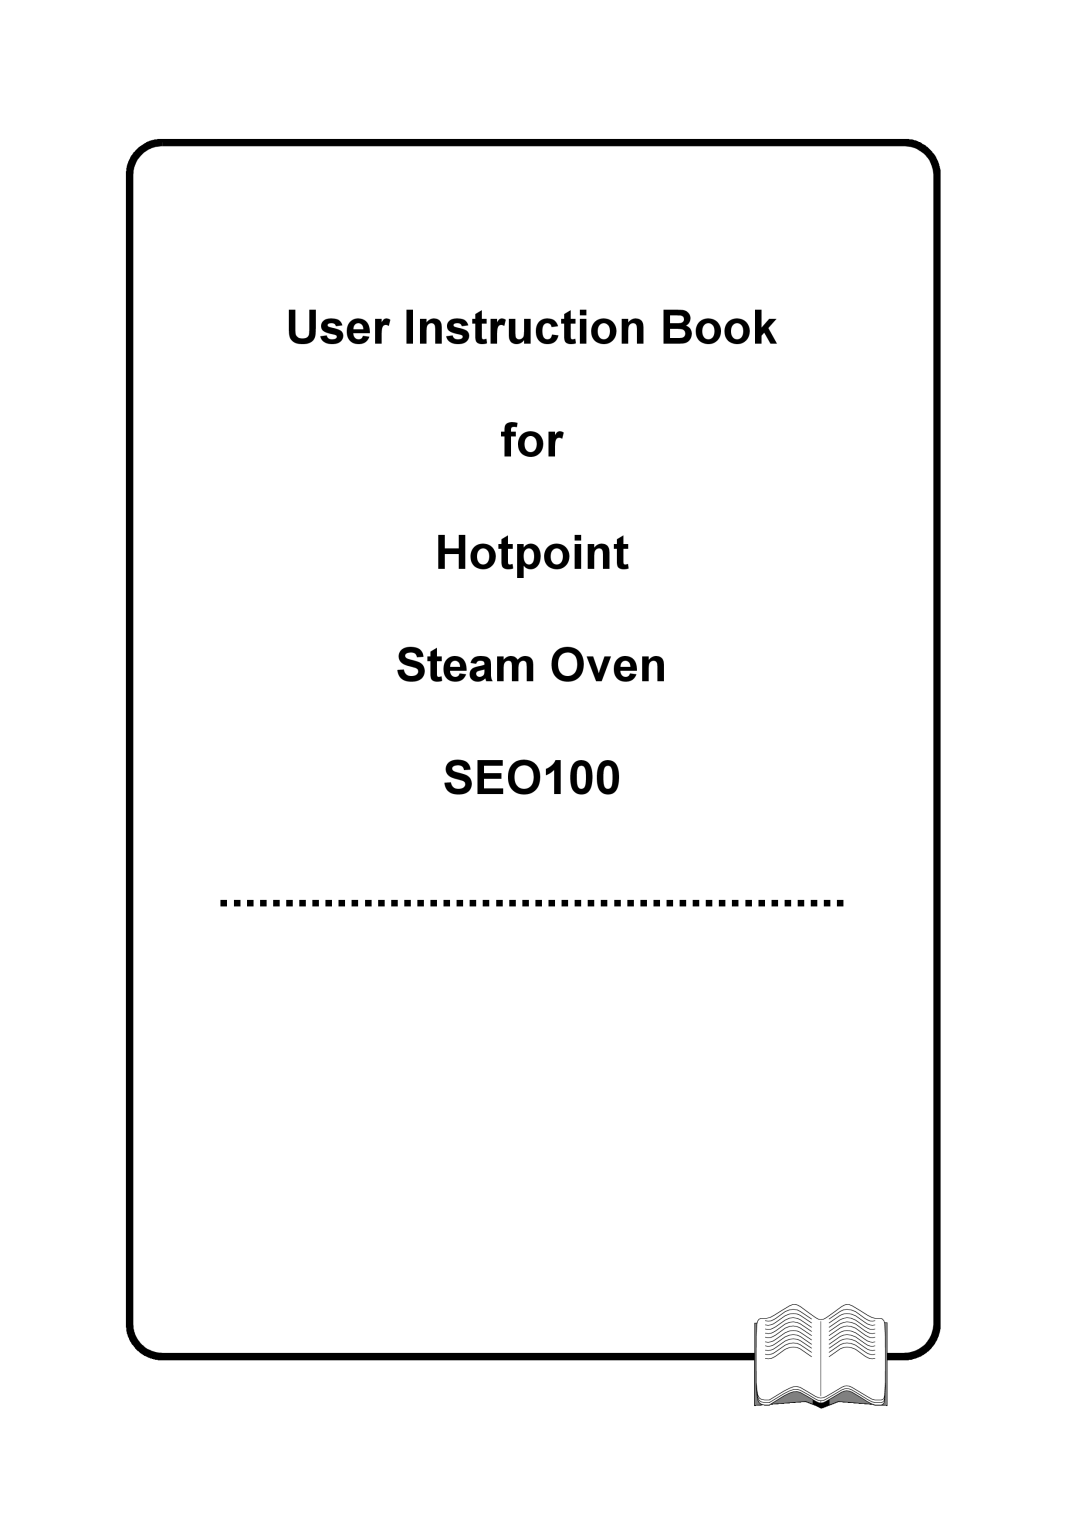 Hotpoint SEO100 manual User Instruction Book for Hotpoint Steam Oven 